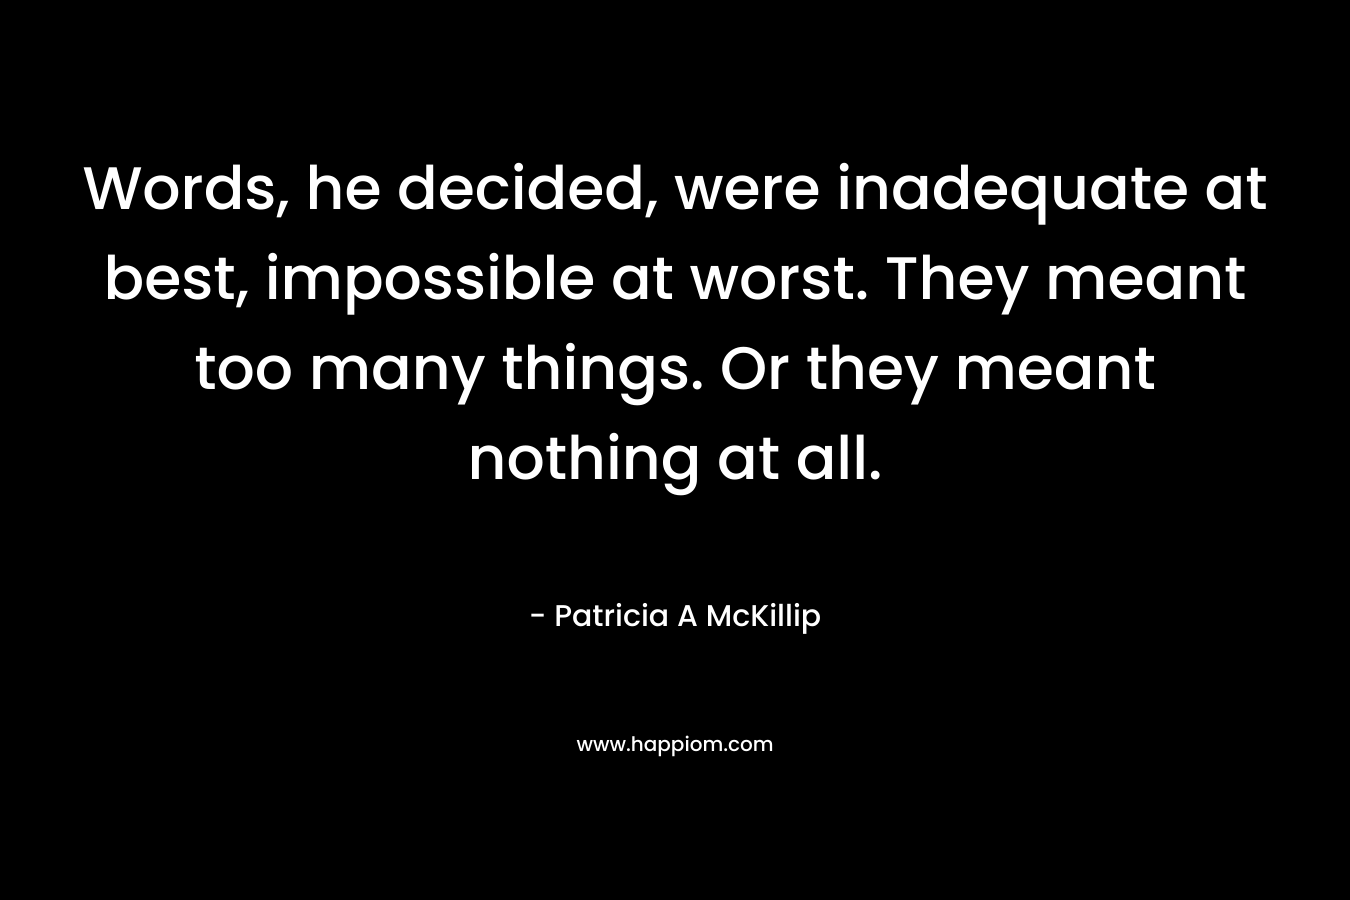 Words, he decided, were inadequate at best, impossible at worst. They meant too many things. Or they meant nothing at all. – Patricia A McKillip